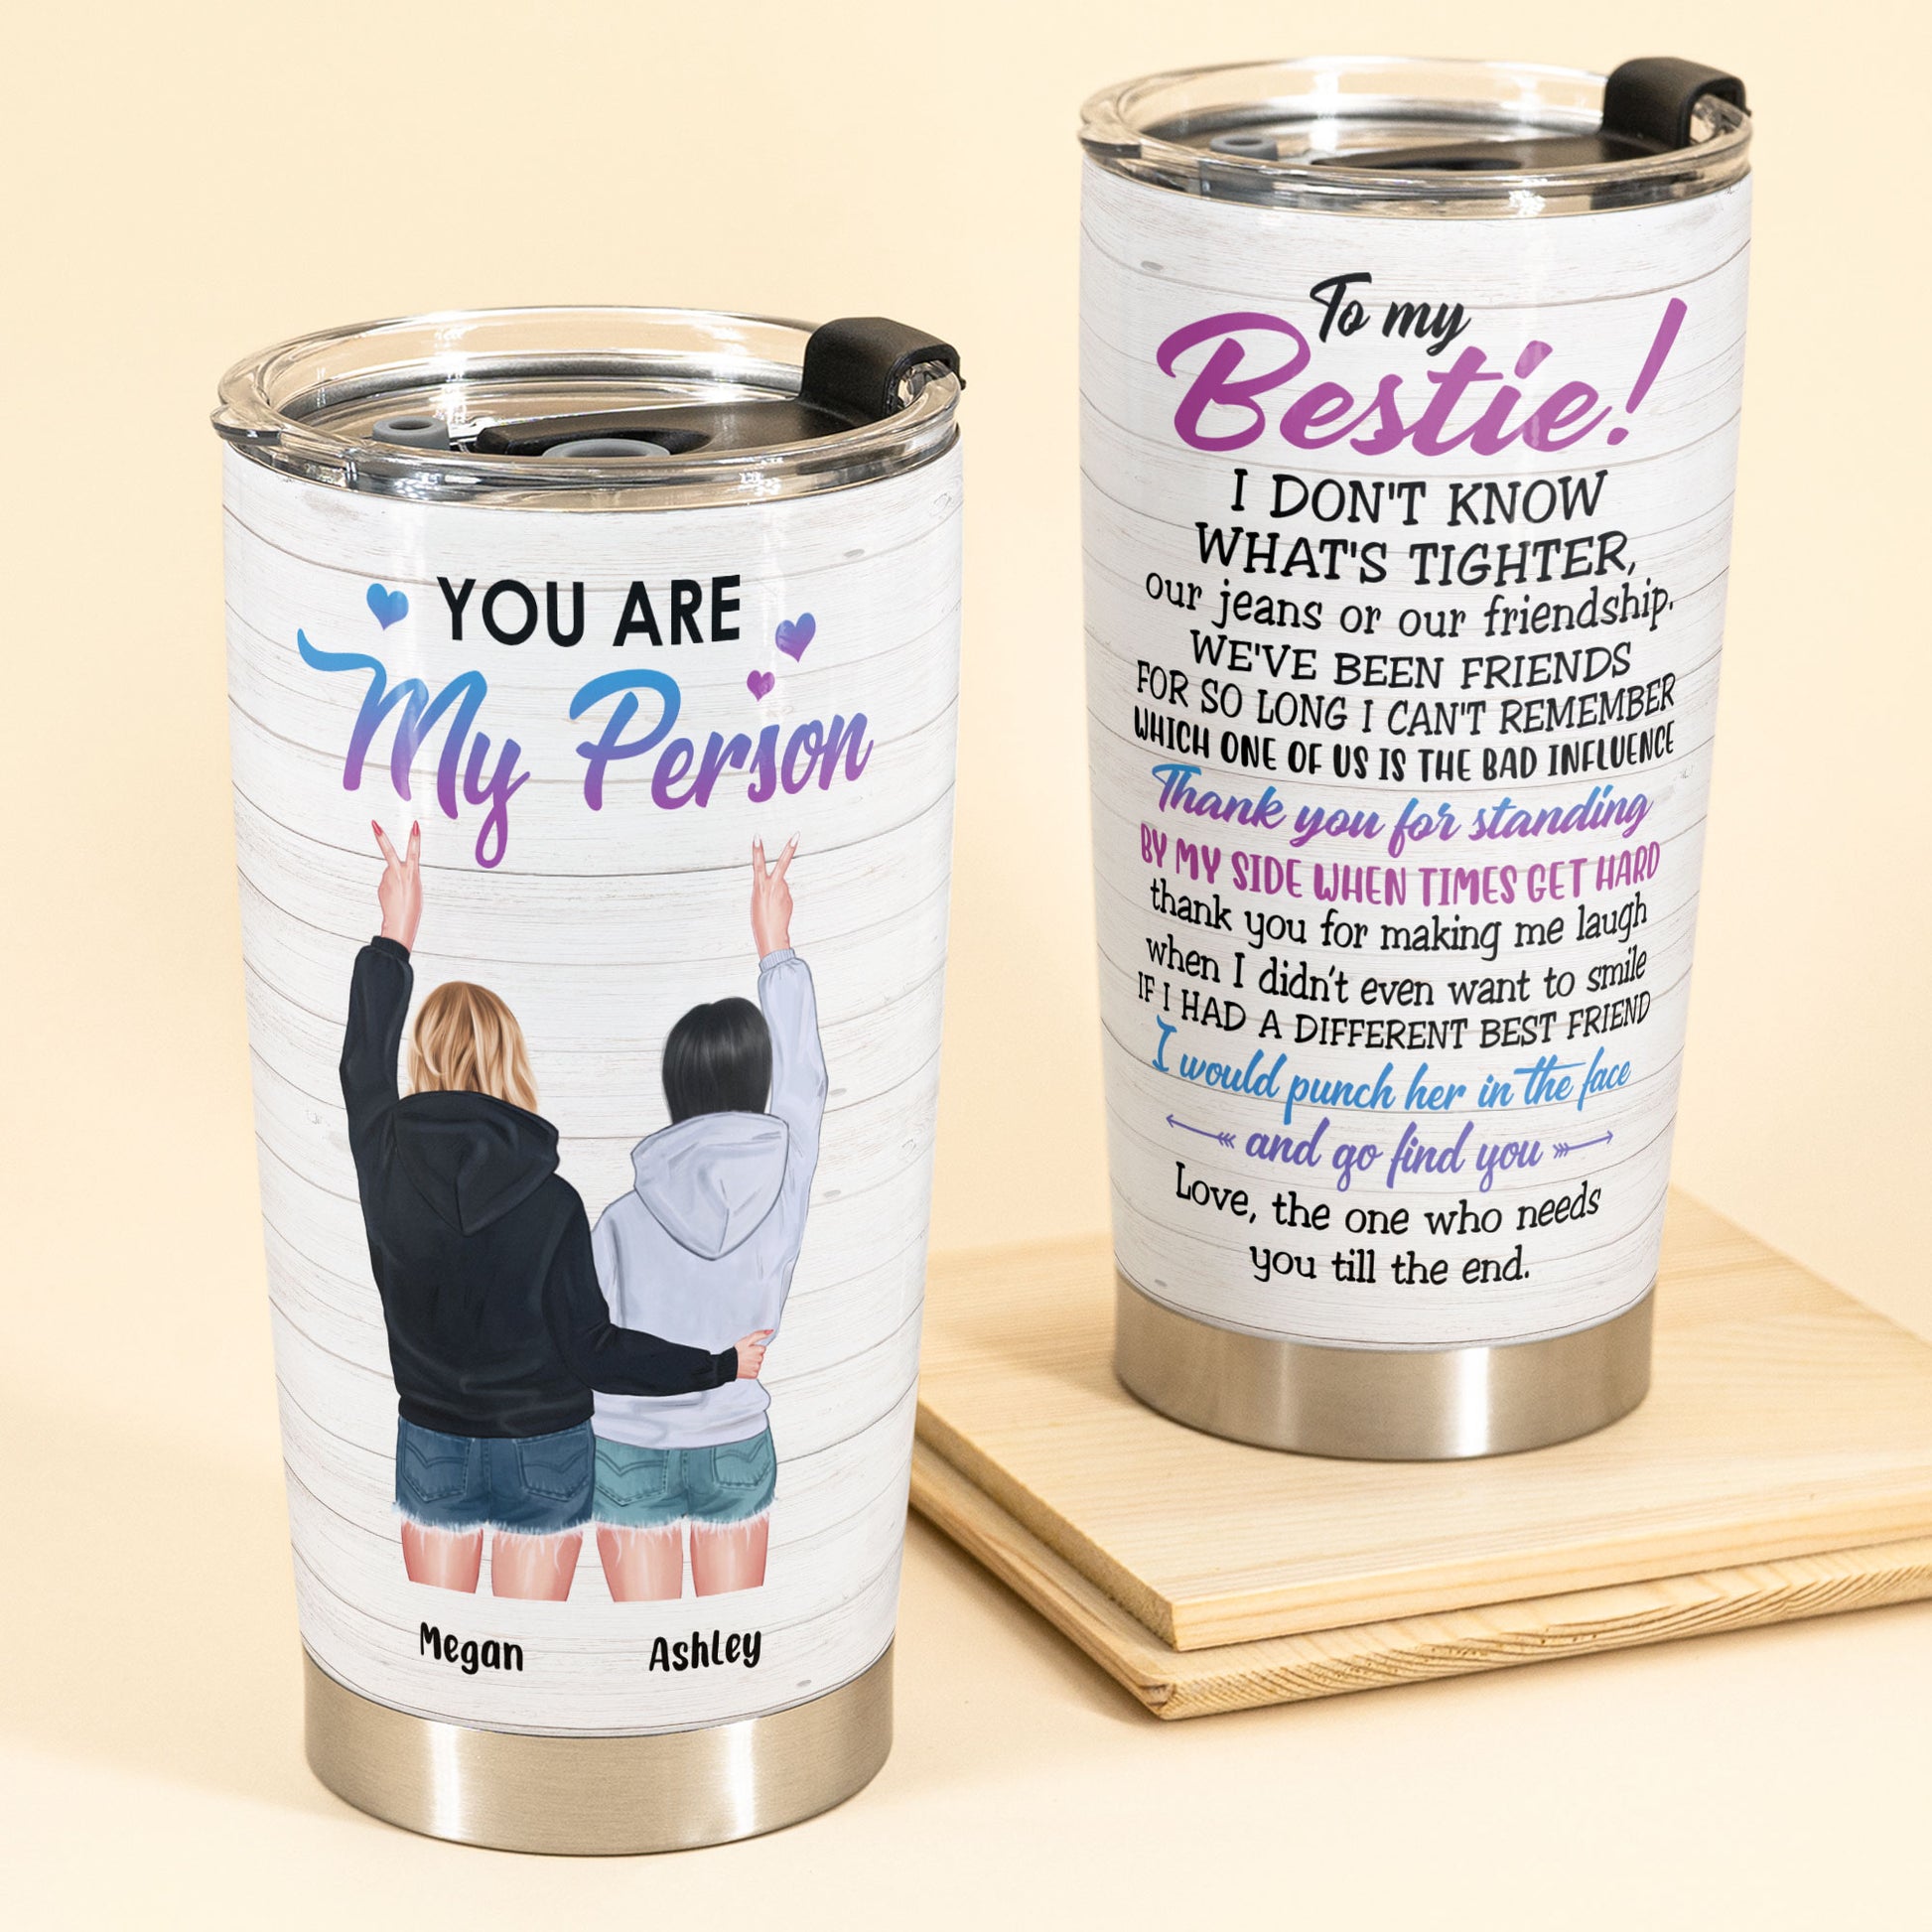 Our Jeans Or Our Friendship - Personalized Tumbler Cup - Gift For Friends - Hoodie Friends Standing